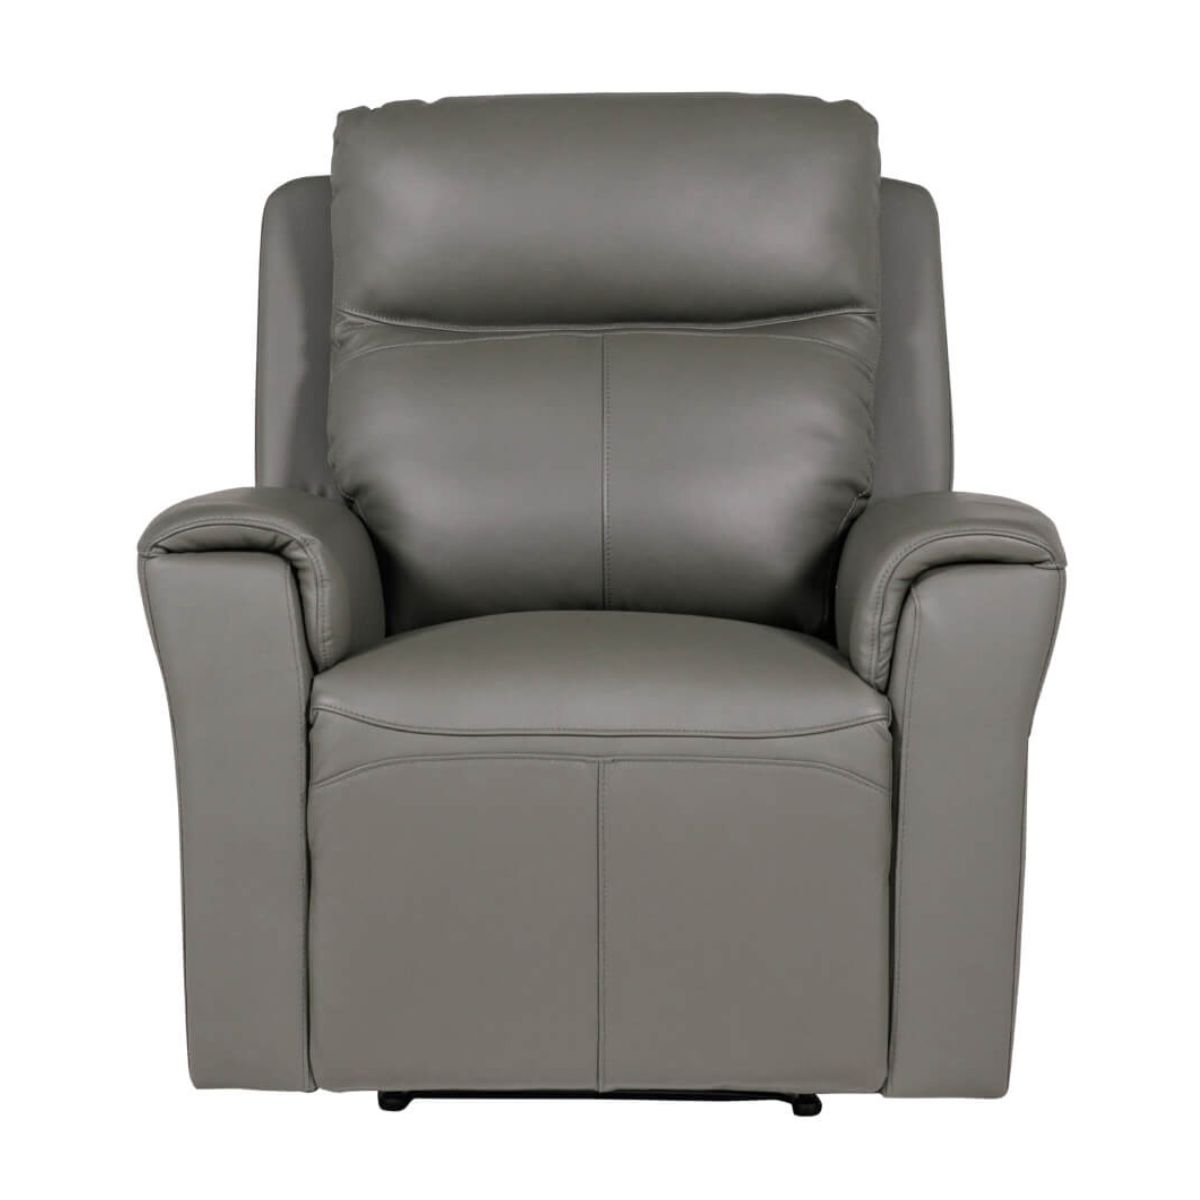 Rosslare Leather Electric Recliner Armchair Grey - 3